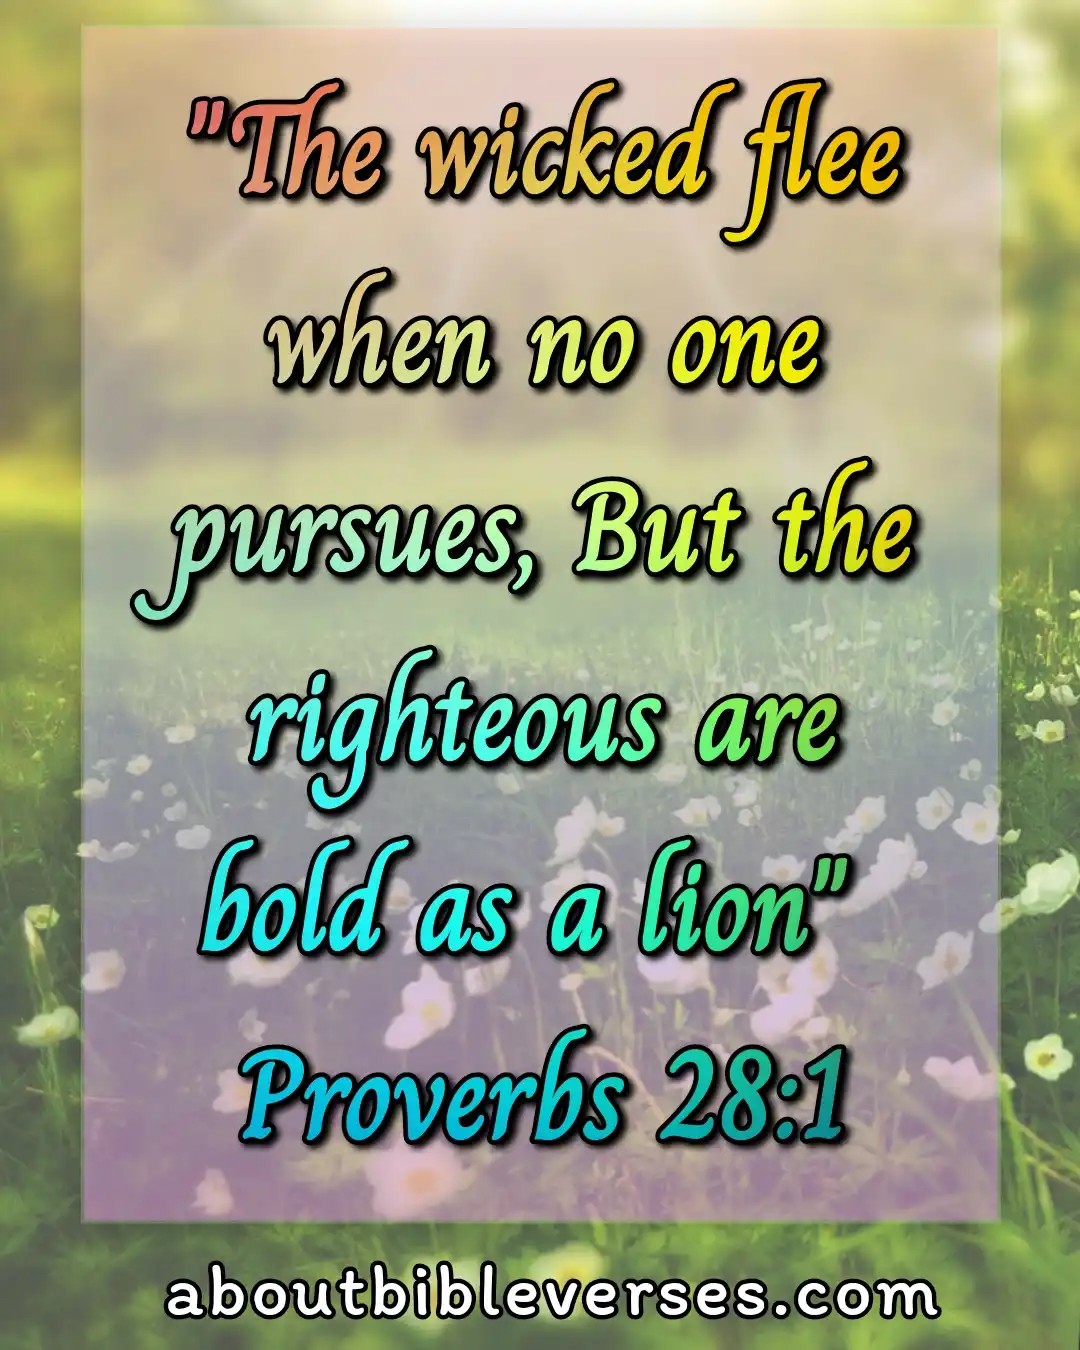 Bible Verses About Courage (Proverbs 28:1)